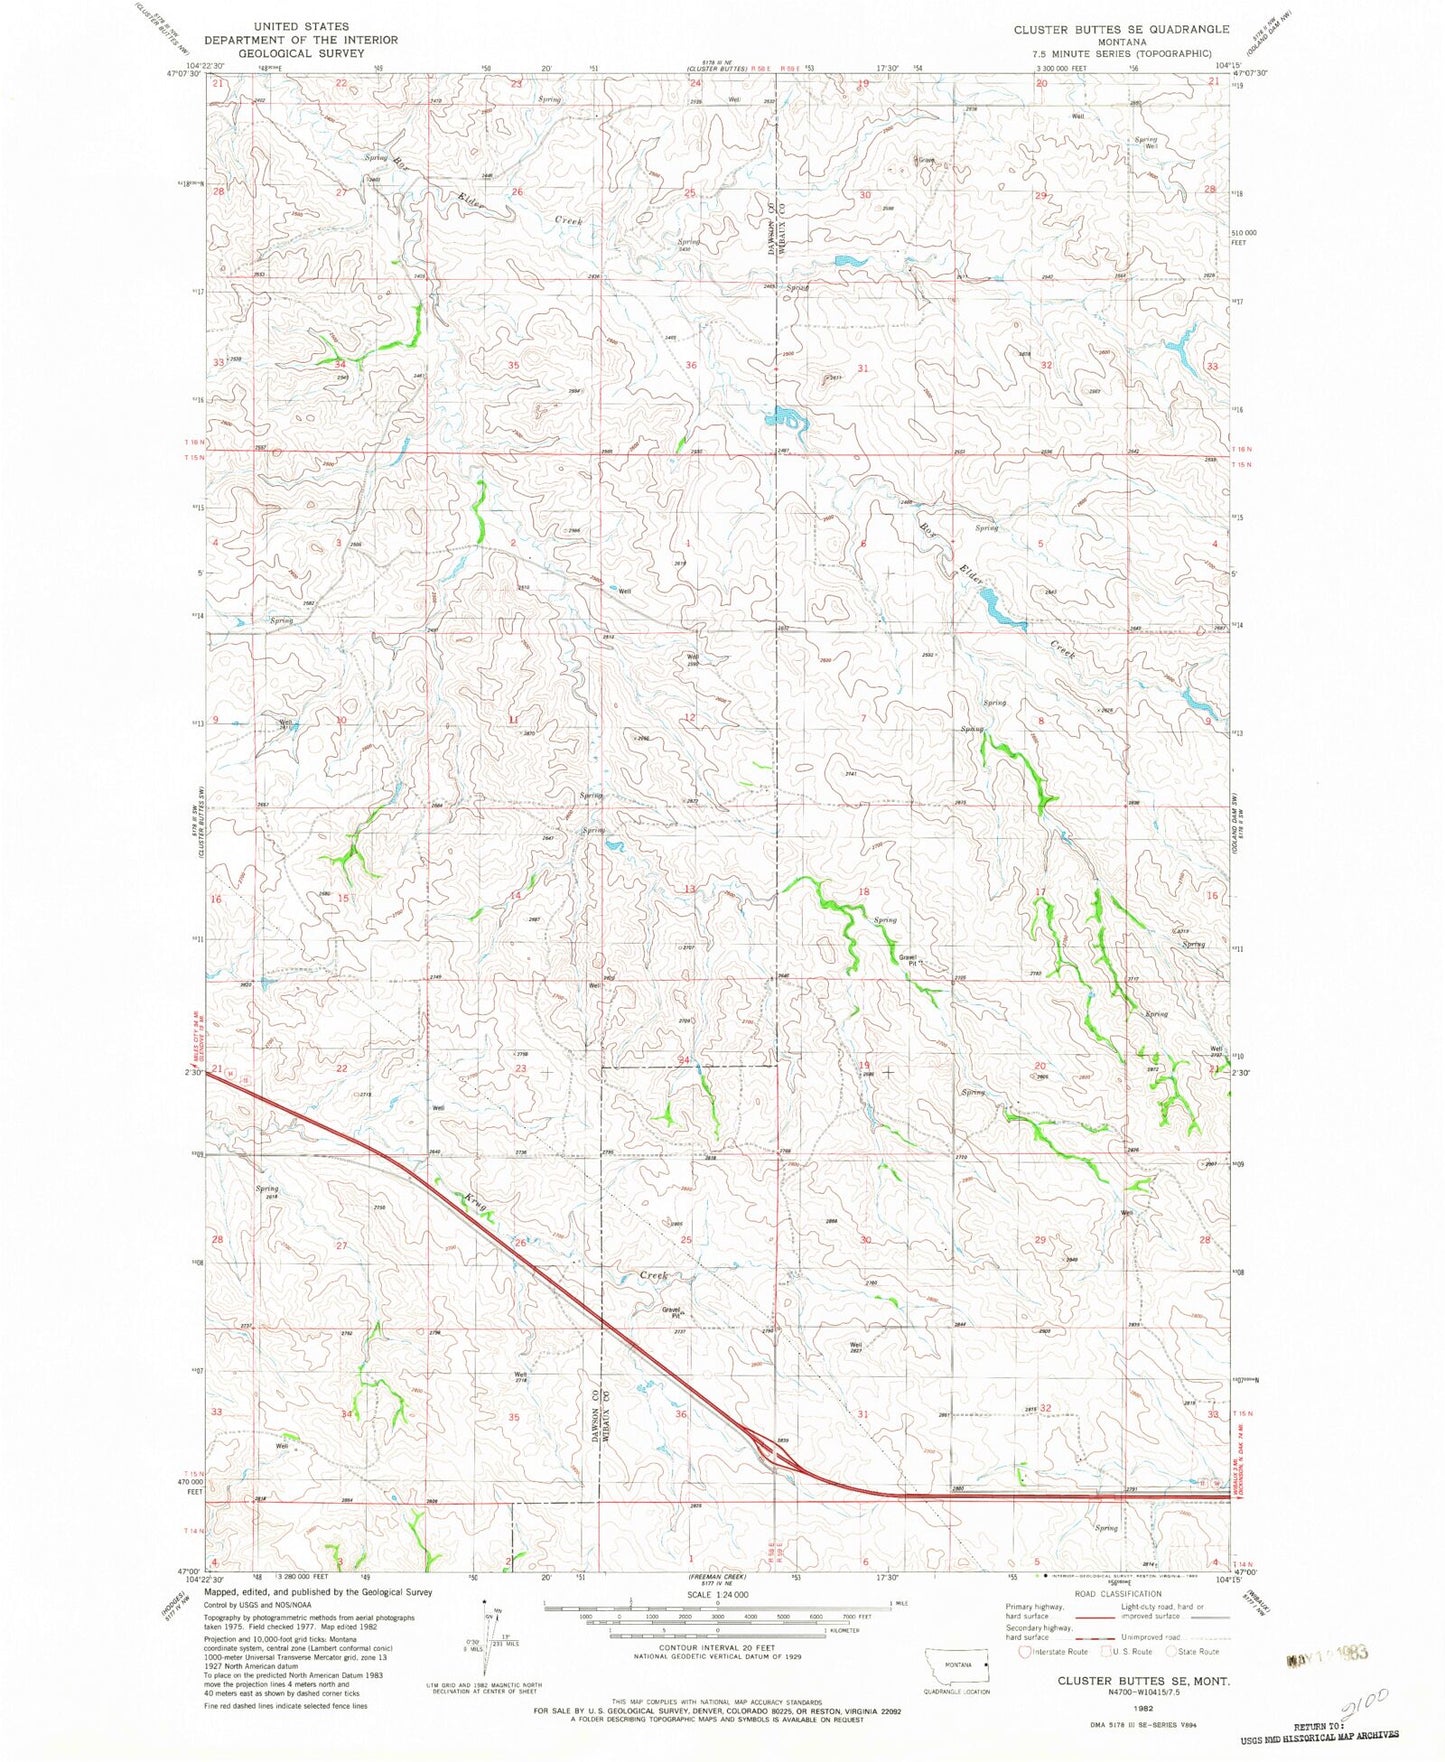 Classic USGS Cluster Buttes SE Montana 7.5'x7.5' Topo Map Image